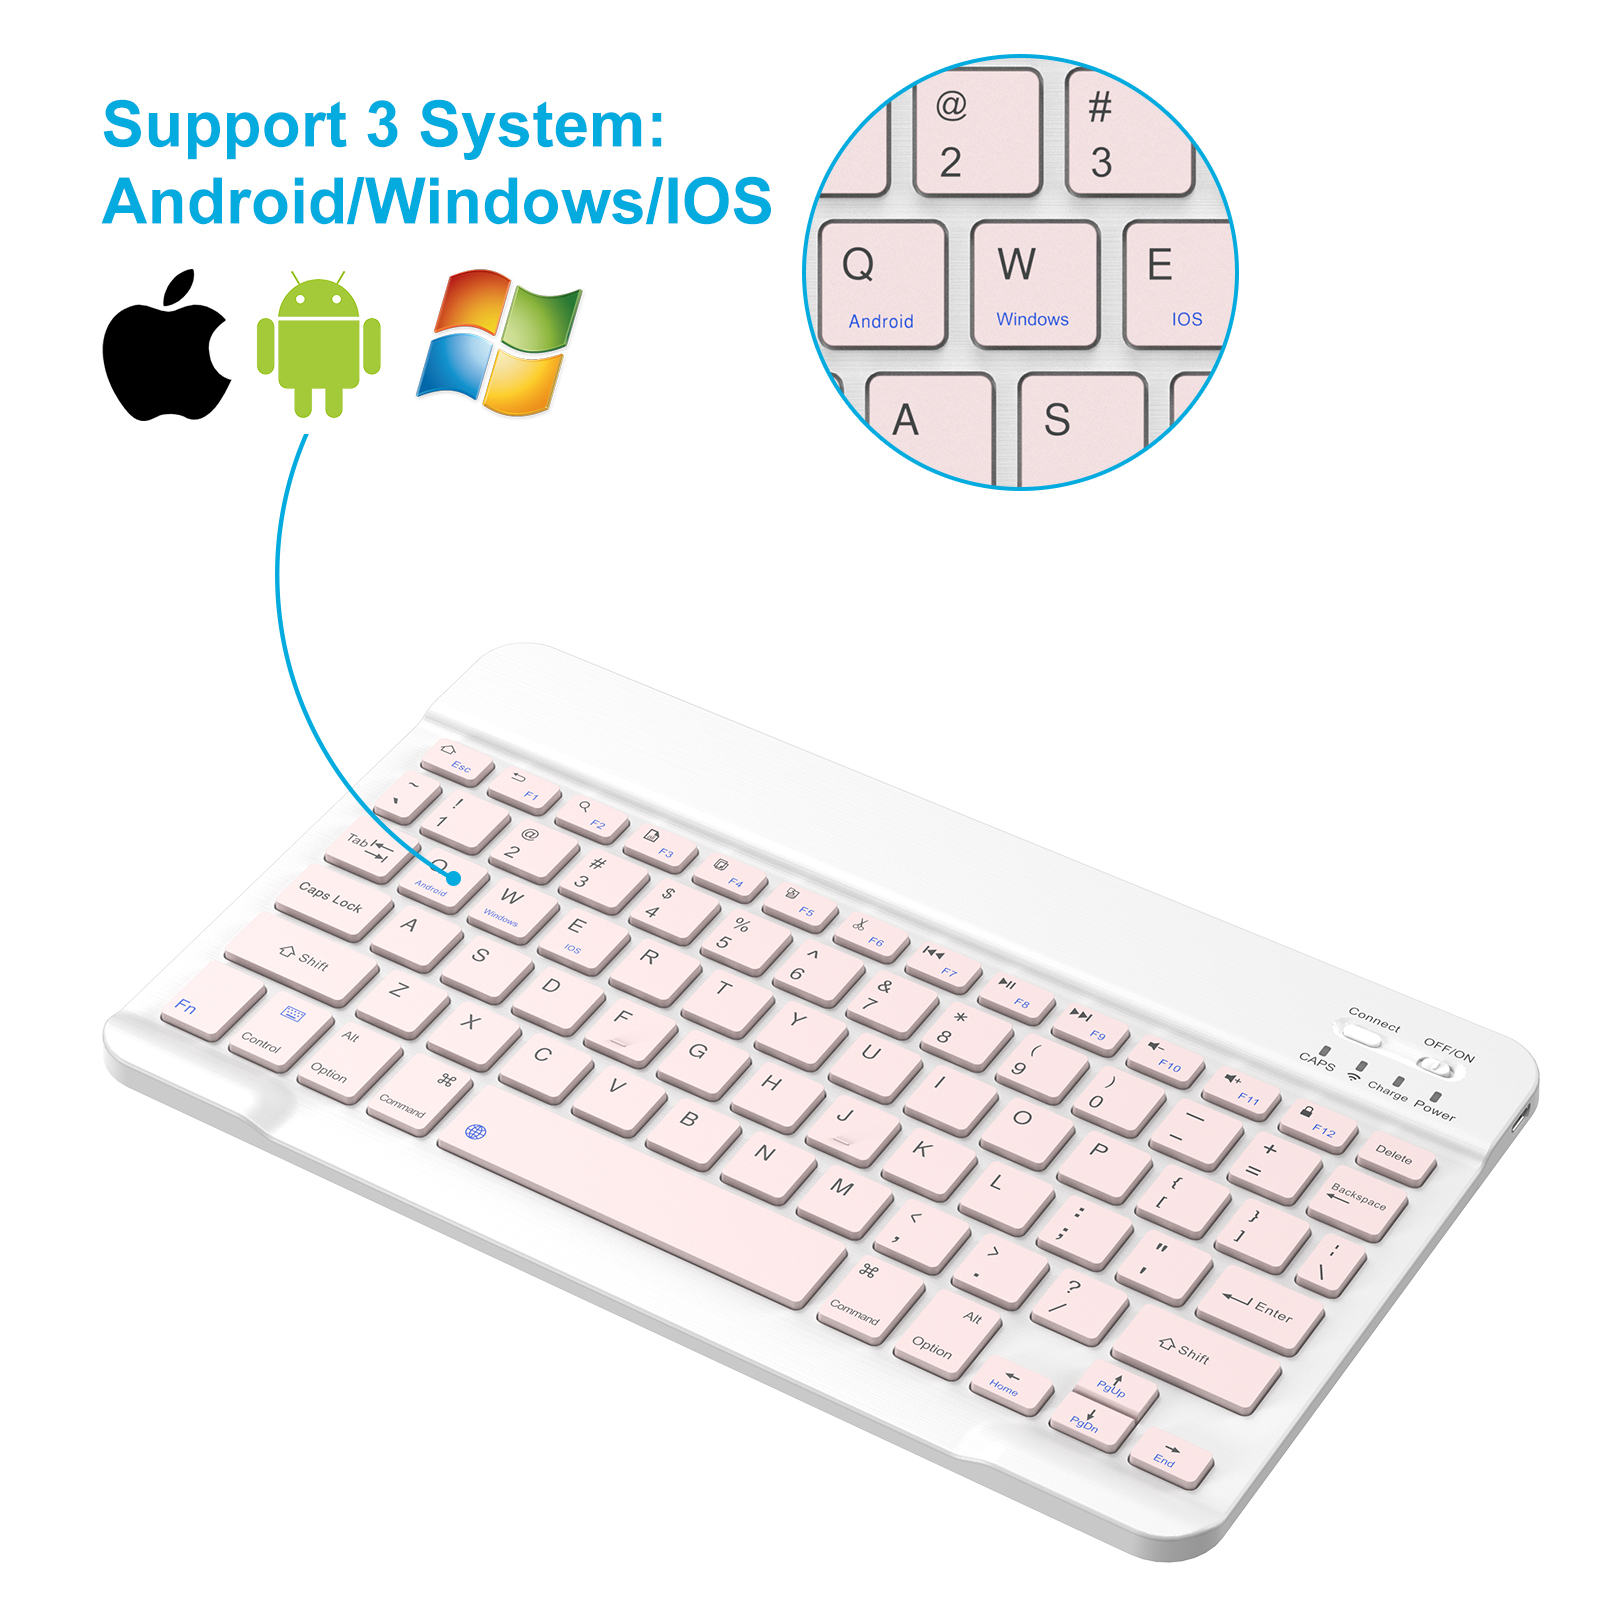 Cimetech Bluetooth Keyboard, Ultra-Slim Wireless Keyboard Quiet Portable Design with Built-in Rechargeable Battery for IOS, Mac, iPad, Windows and Android 3.0 and Above OS Pink - image 4 of 8